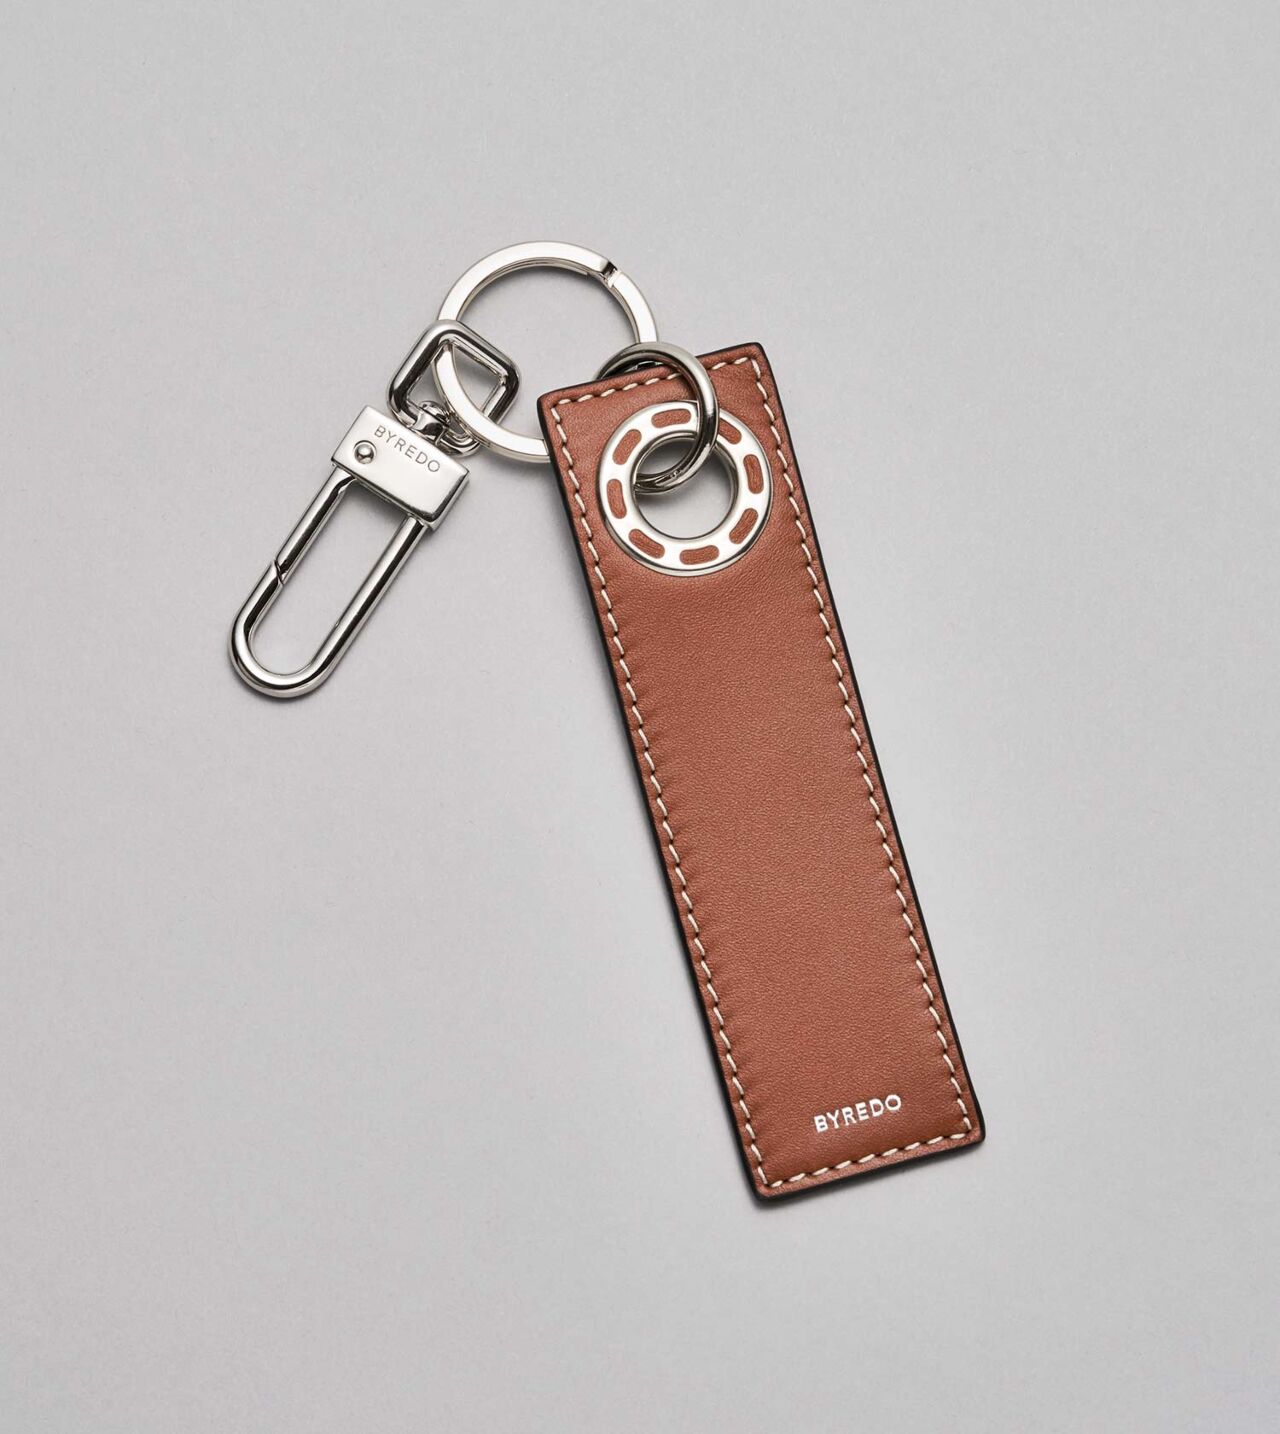 Keychain in Saddle Tan Leather